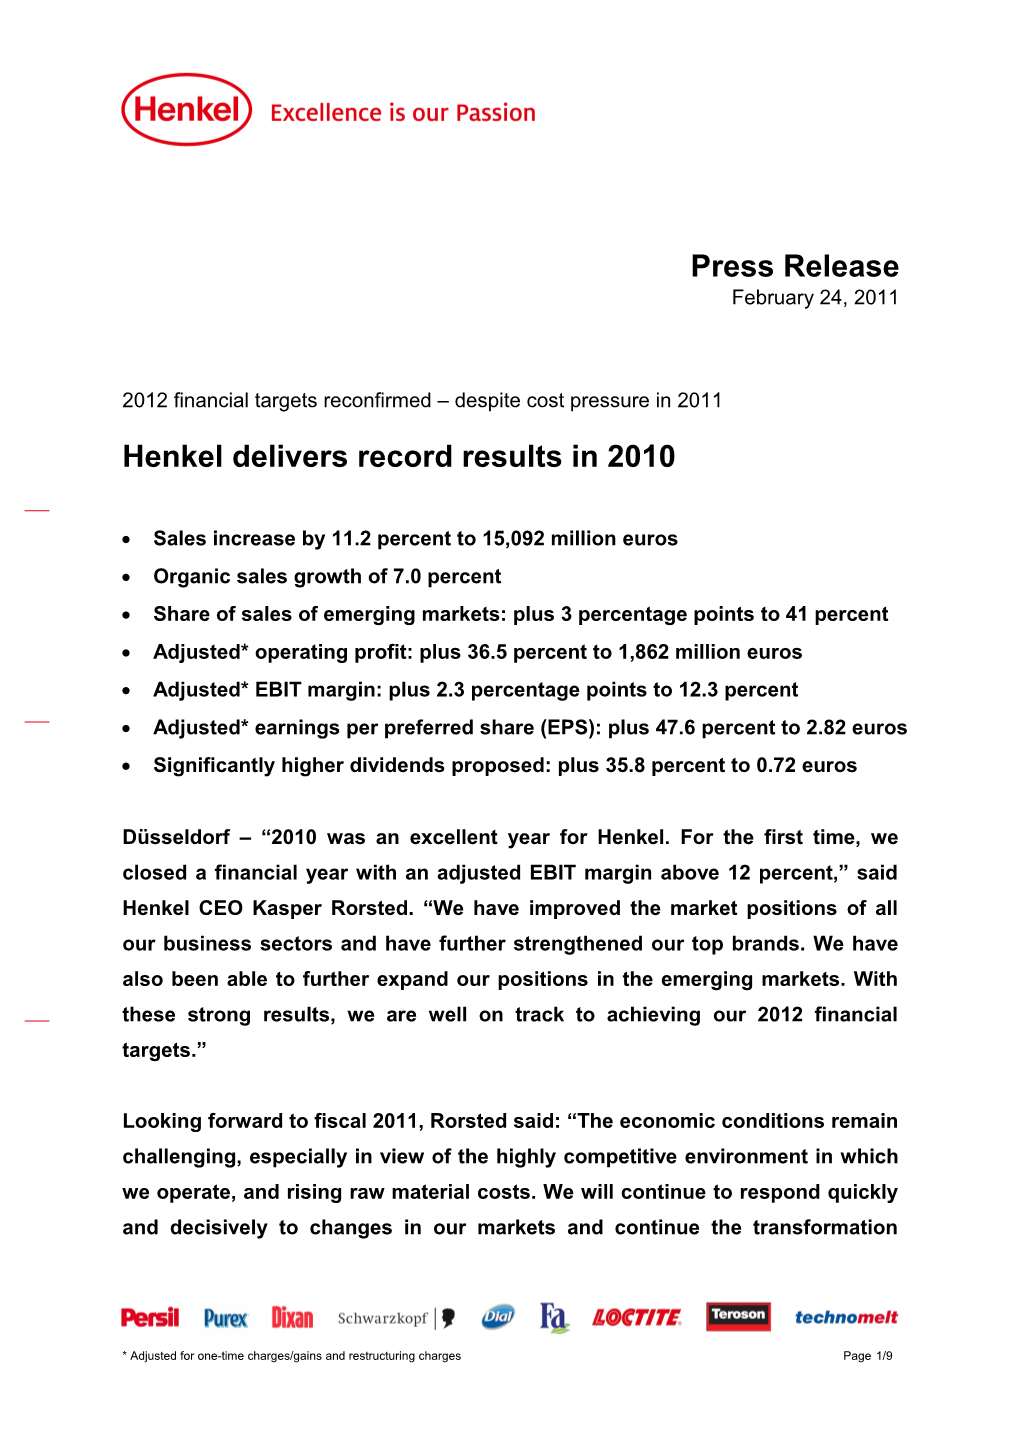 Henkel Delivers Record Results in 2010